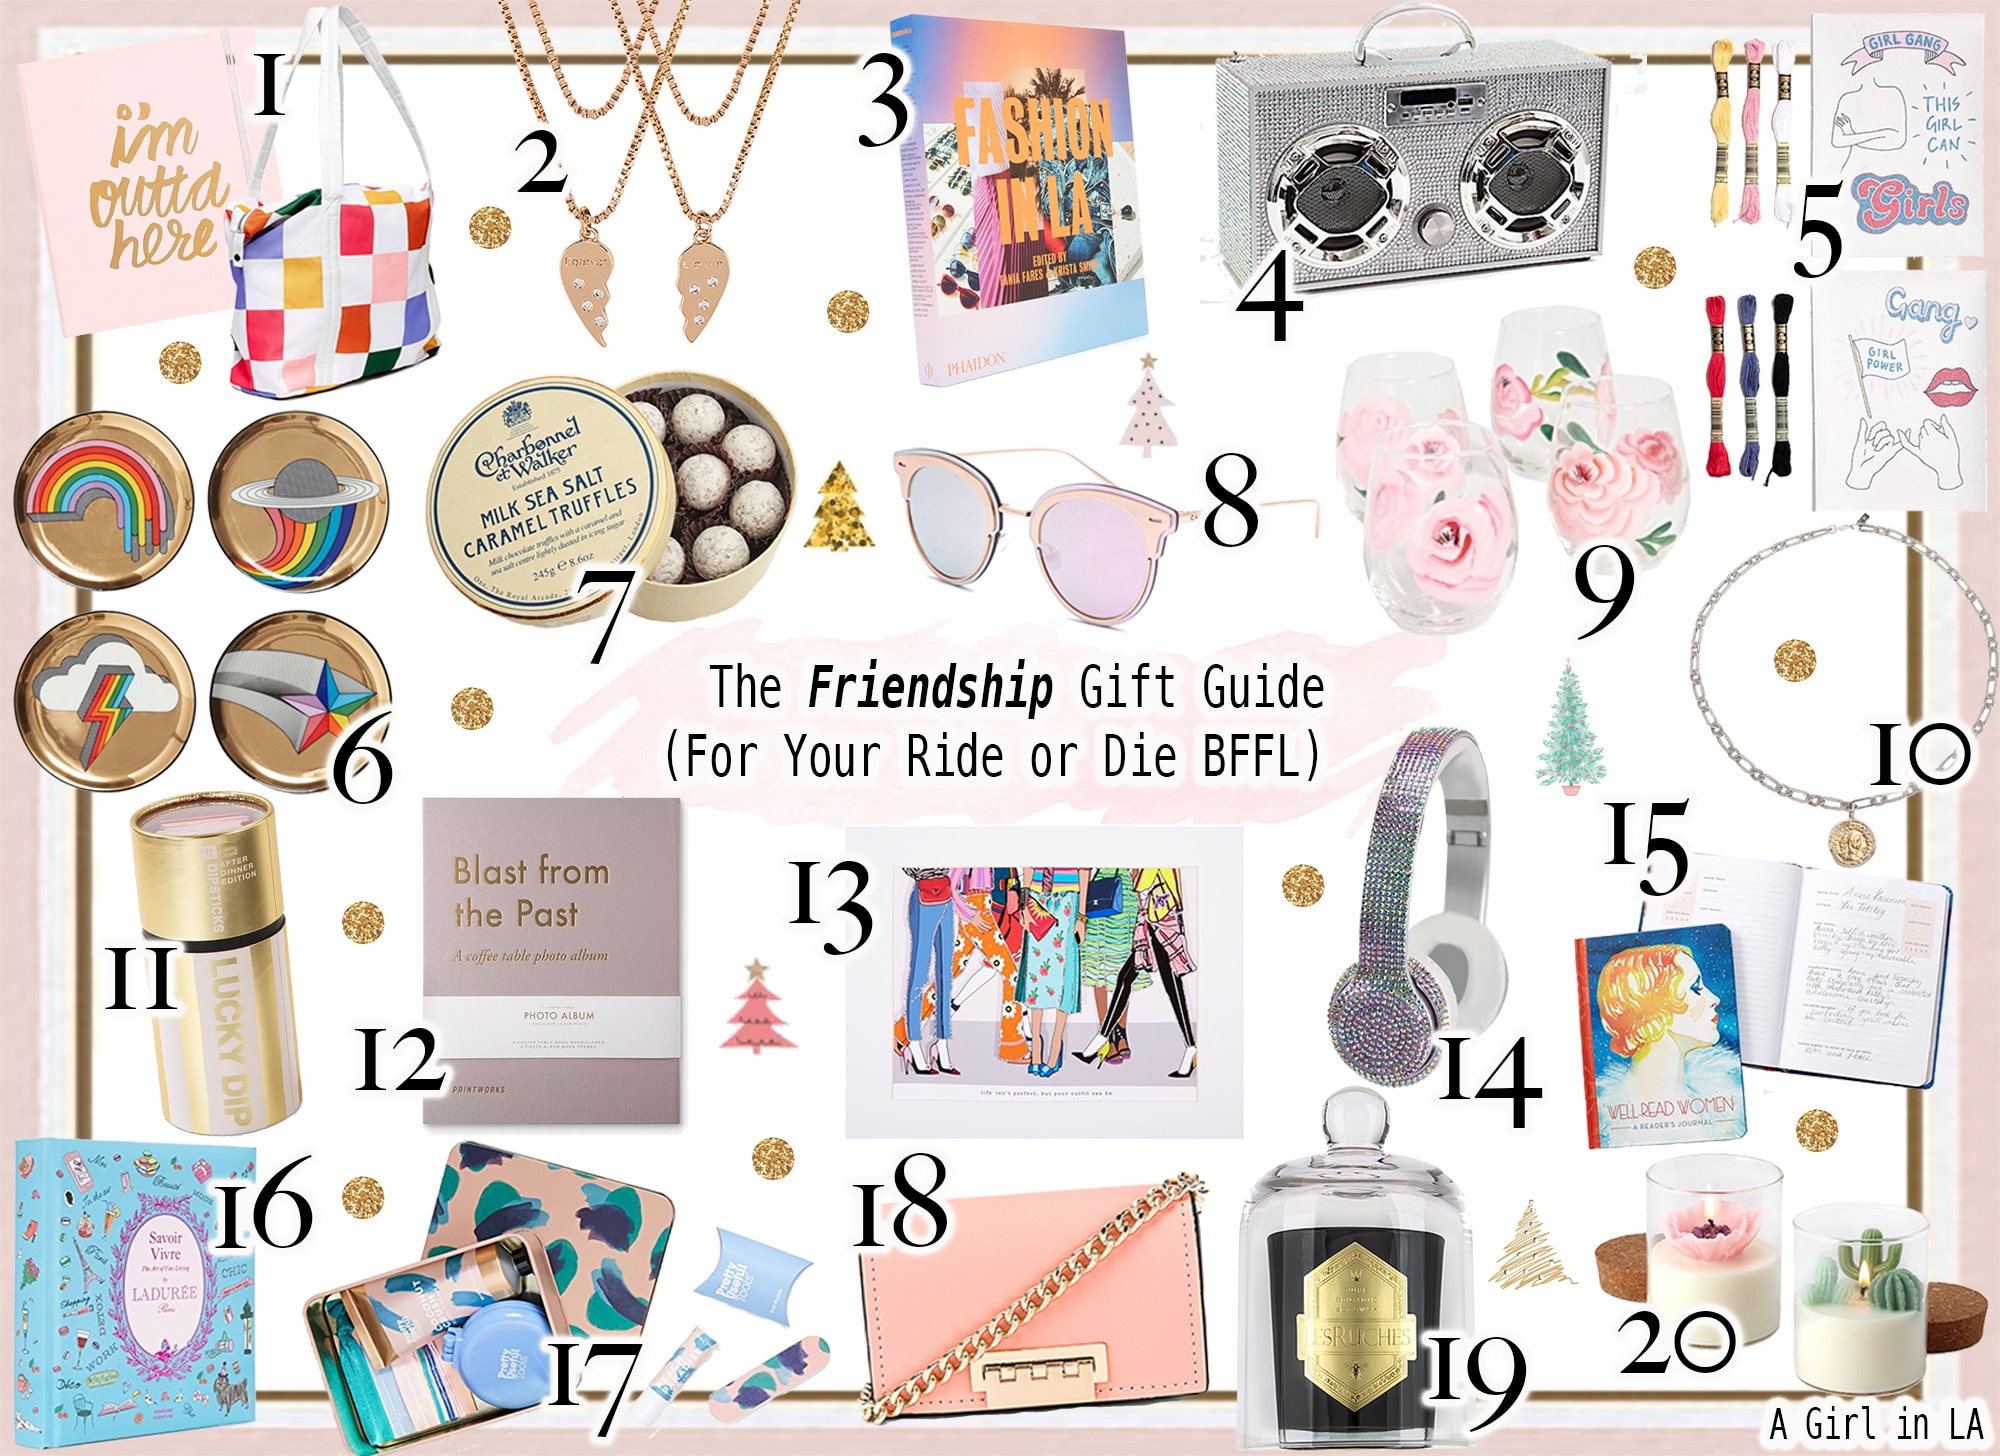 The Friendship Gift Guide (For Your Ride or Die BFFL)